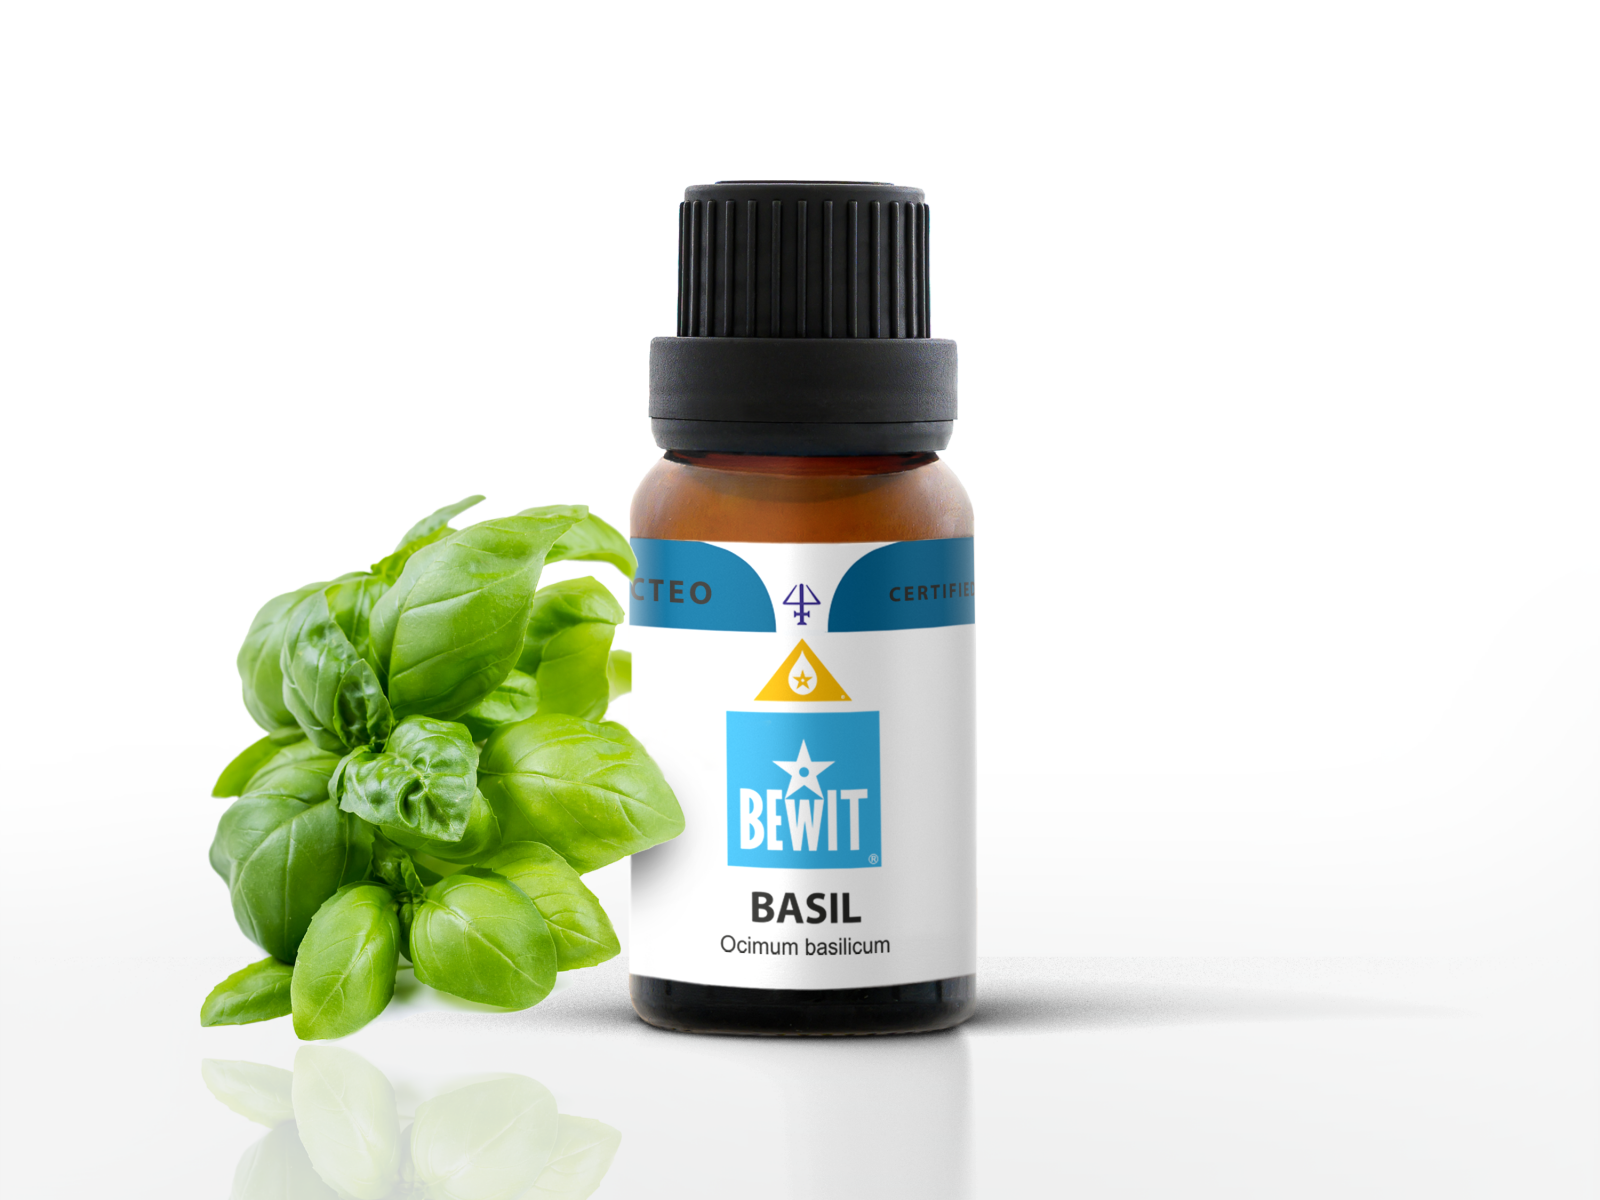 Basil. - This is a 100% pure essential oil